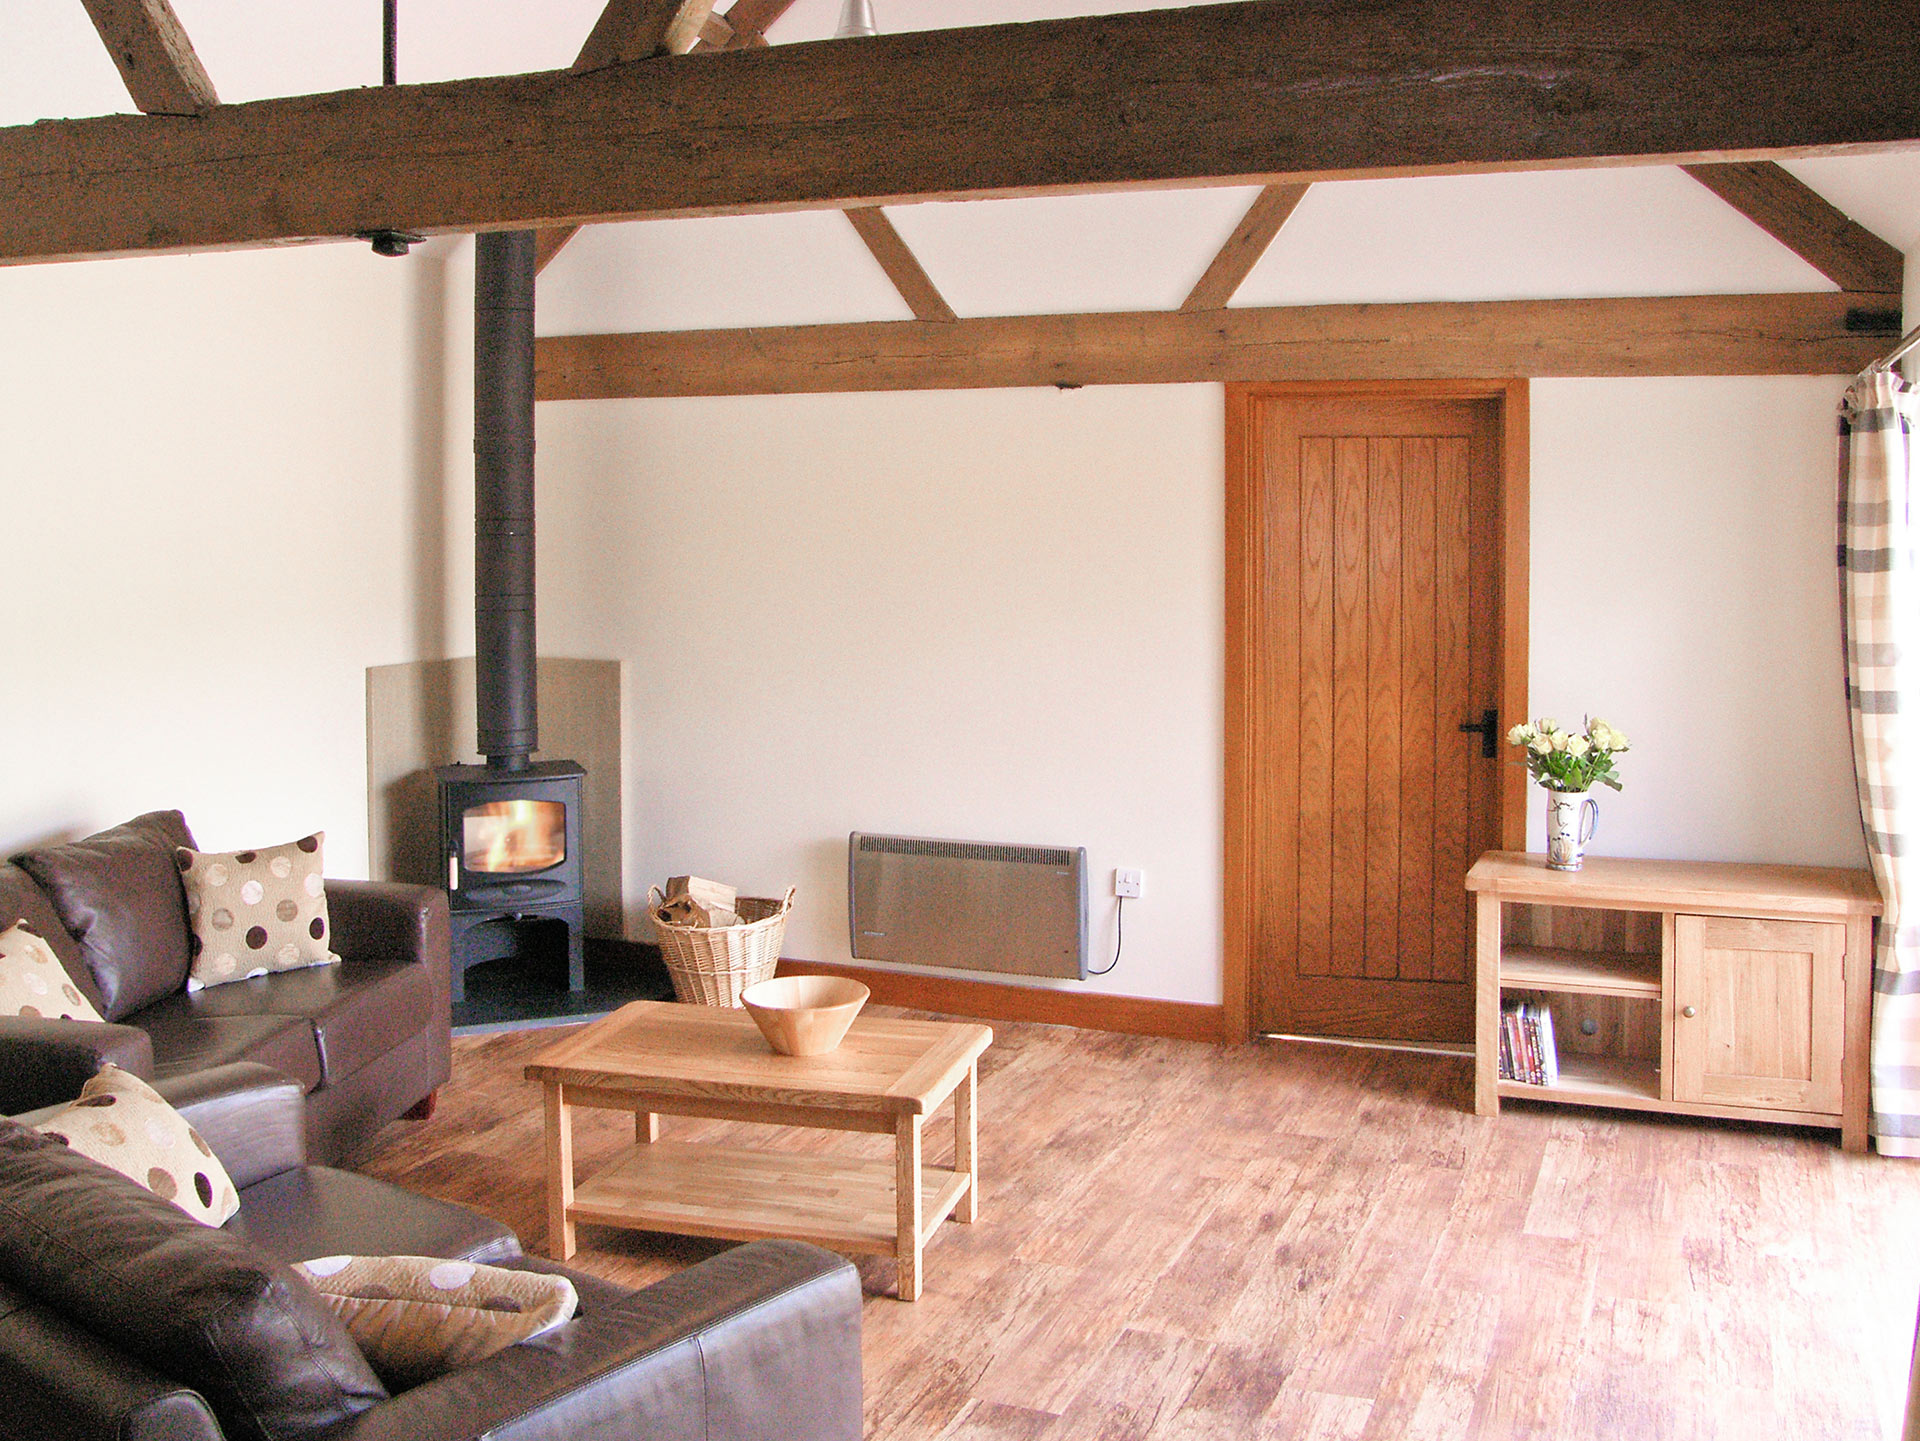 living space in neutral tones with wood burner and exposed wooden beams